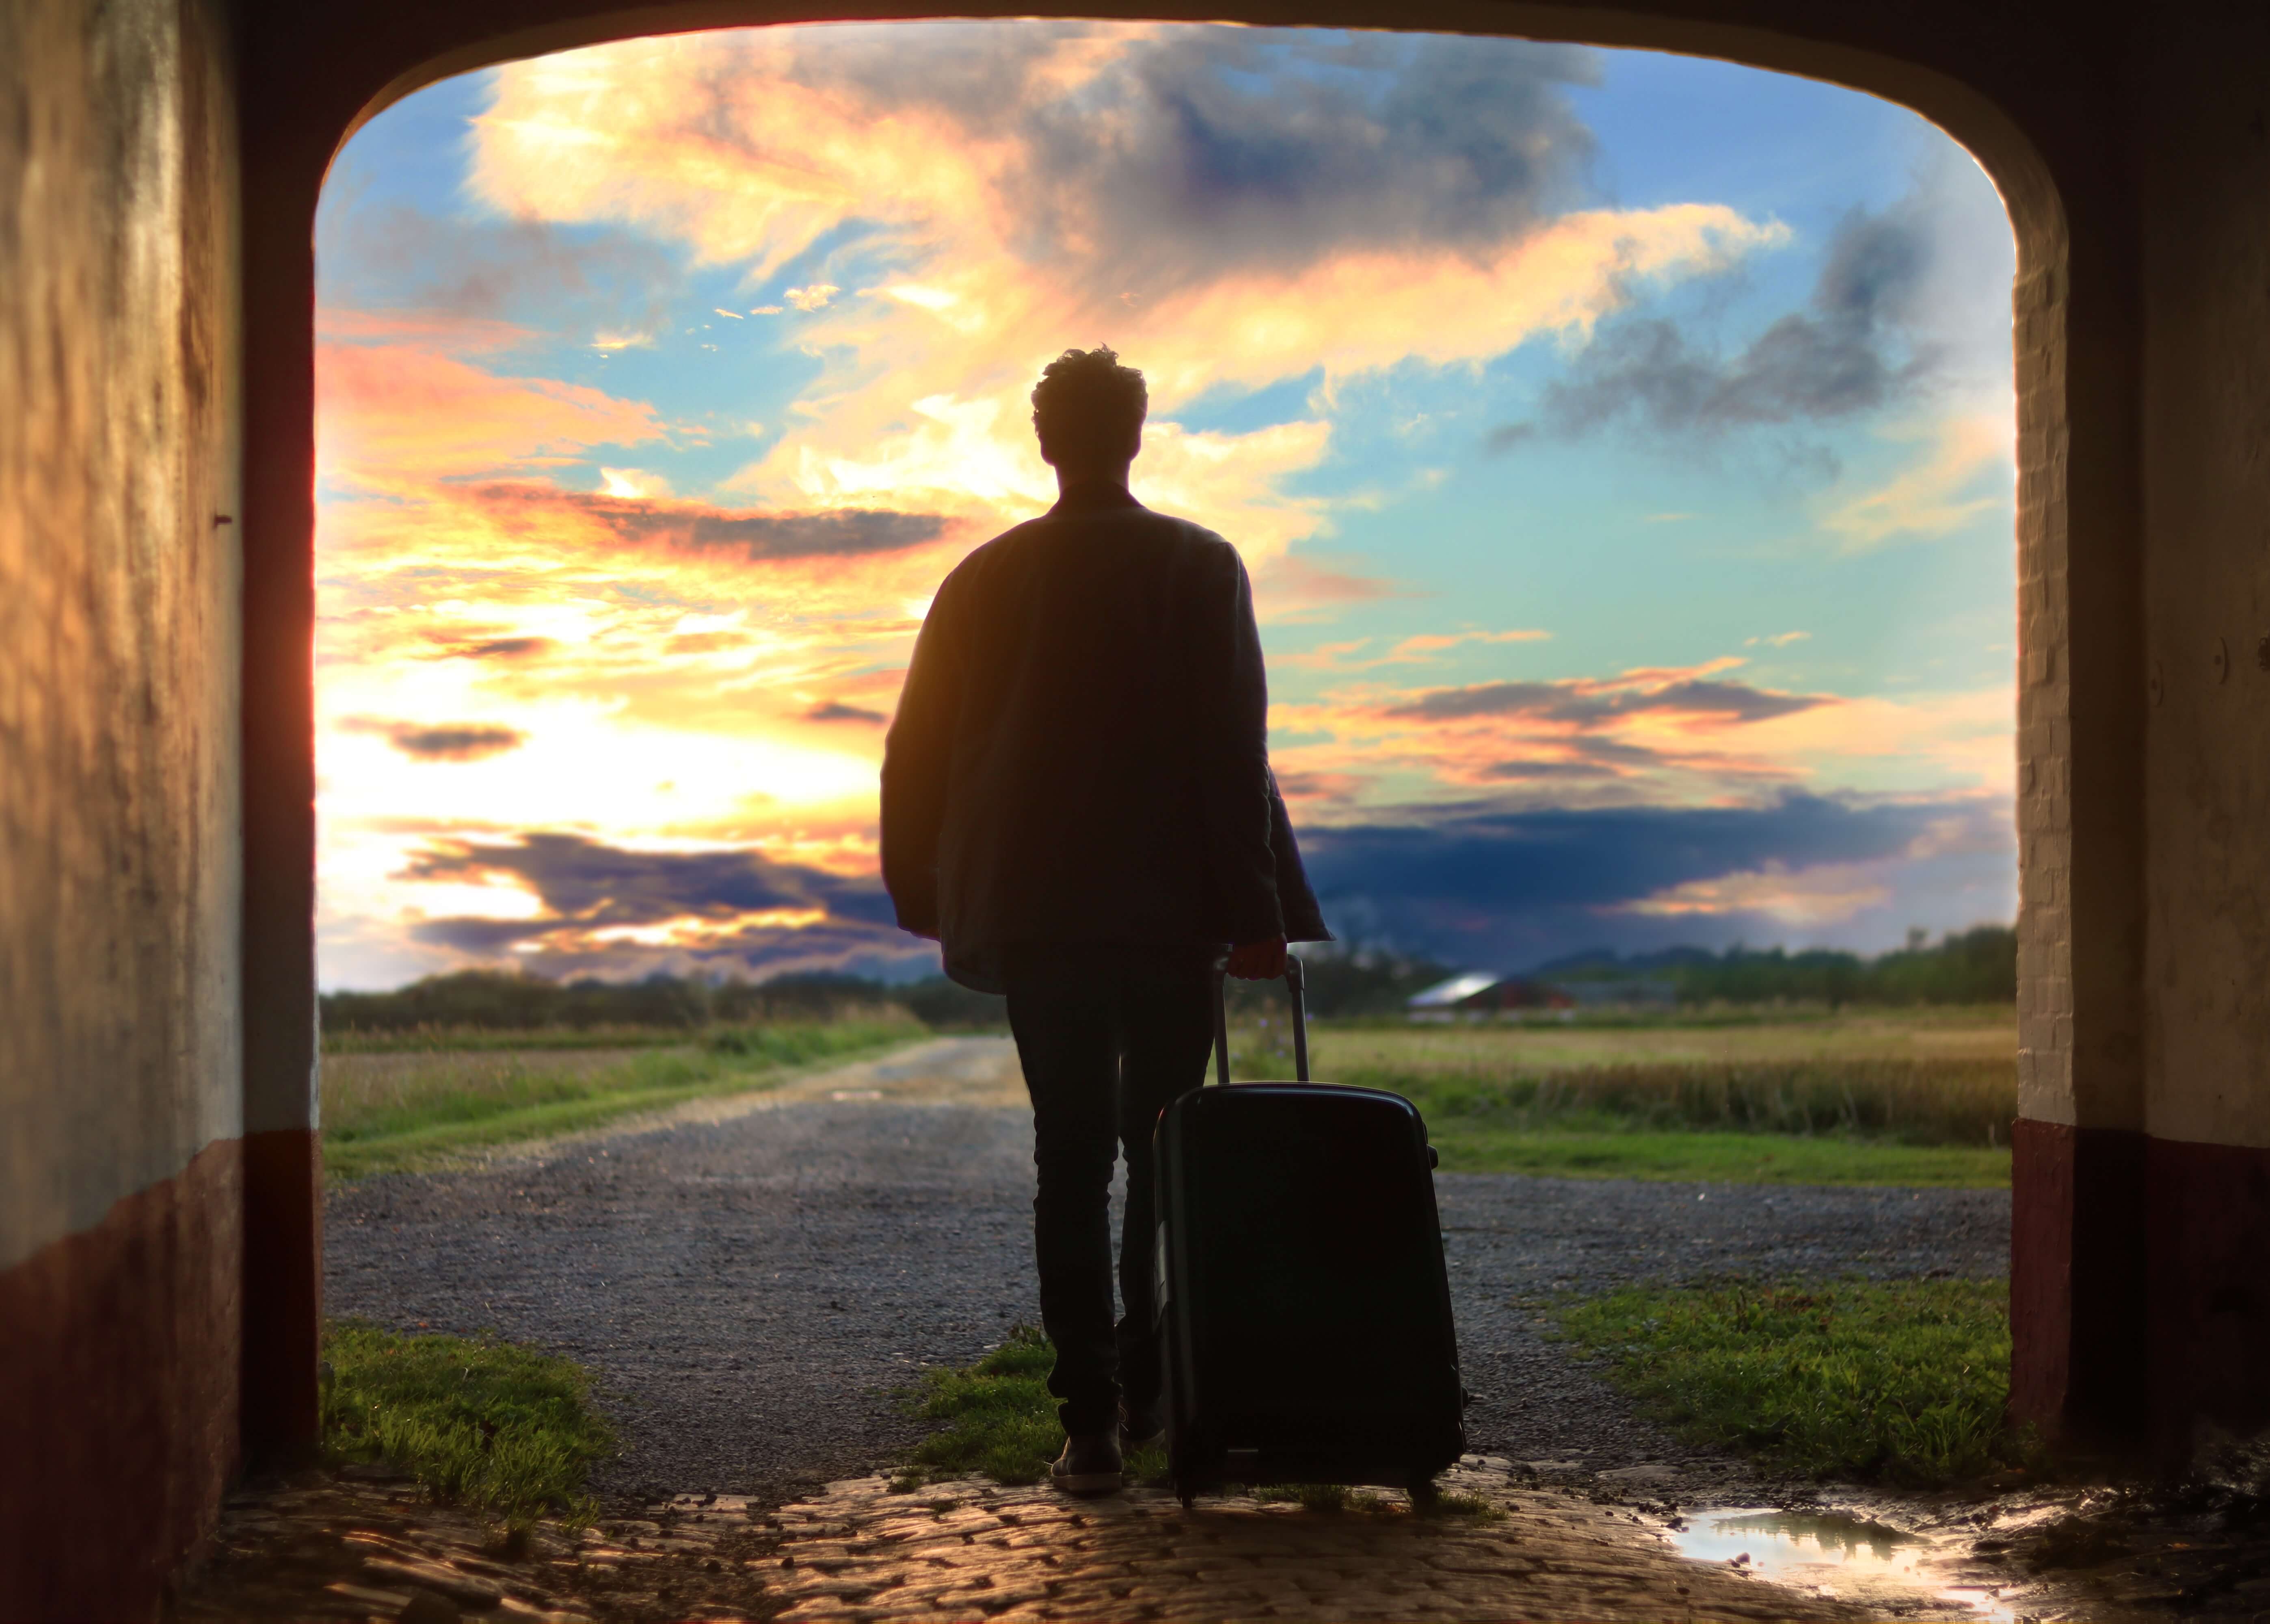 A man with a suitcase heading off into the horizon